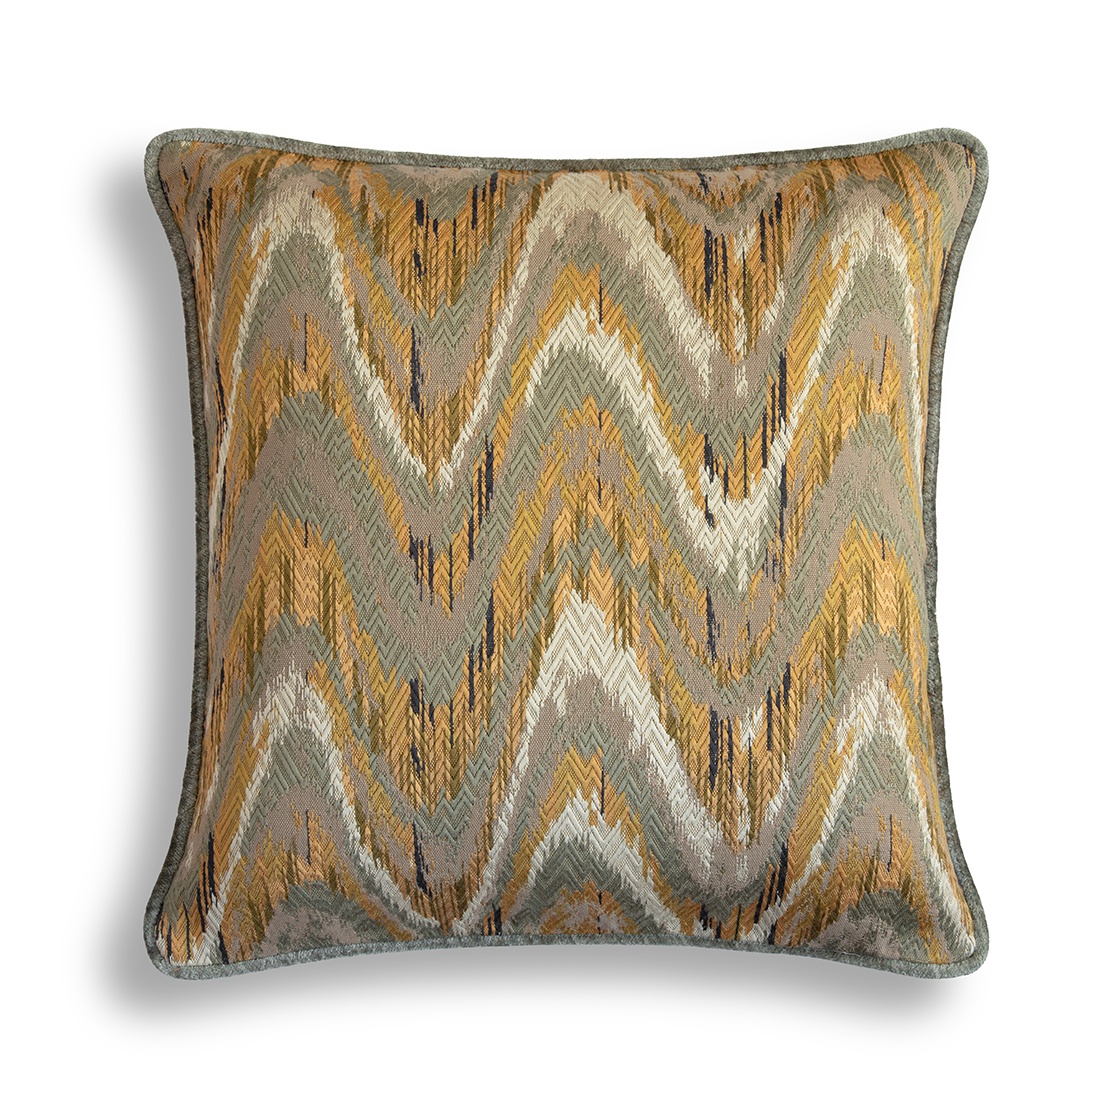 Kyma cushion - Heritage backed and piped in Como silk velvet - Moss - Beaumont & Fletcher